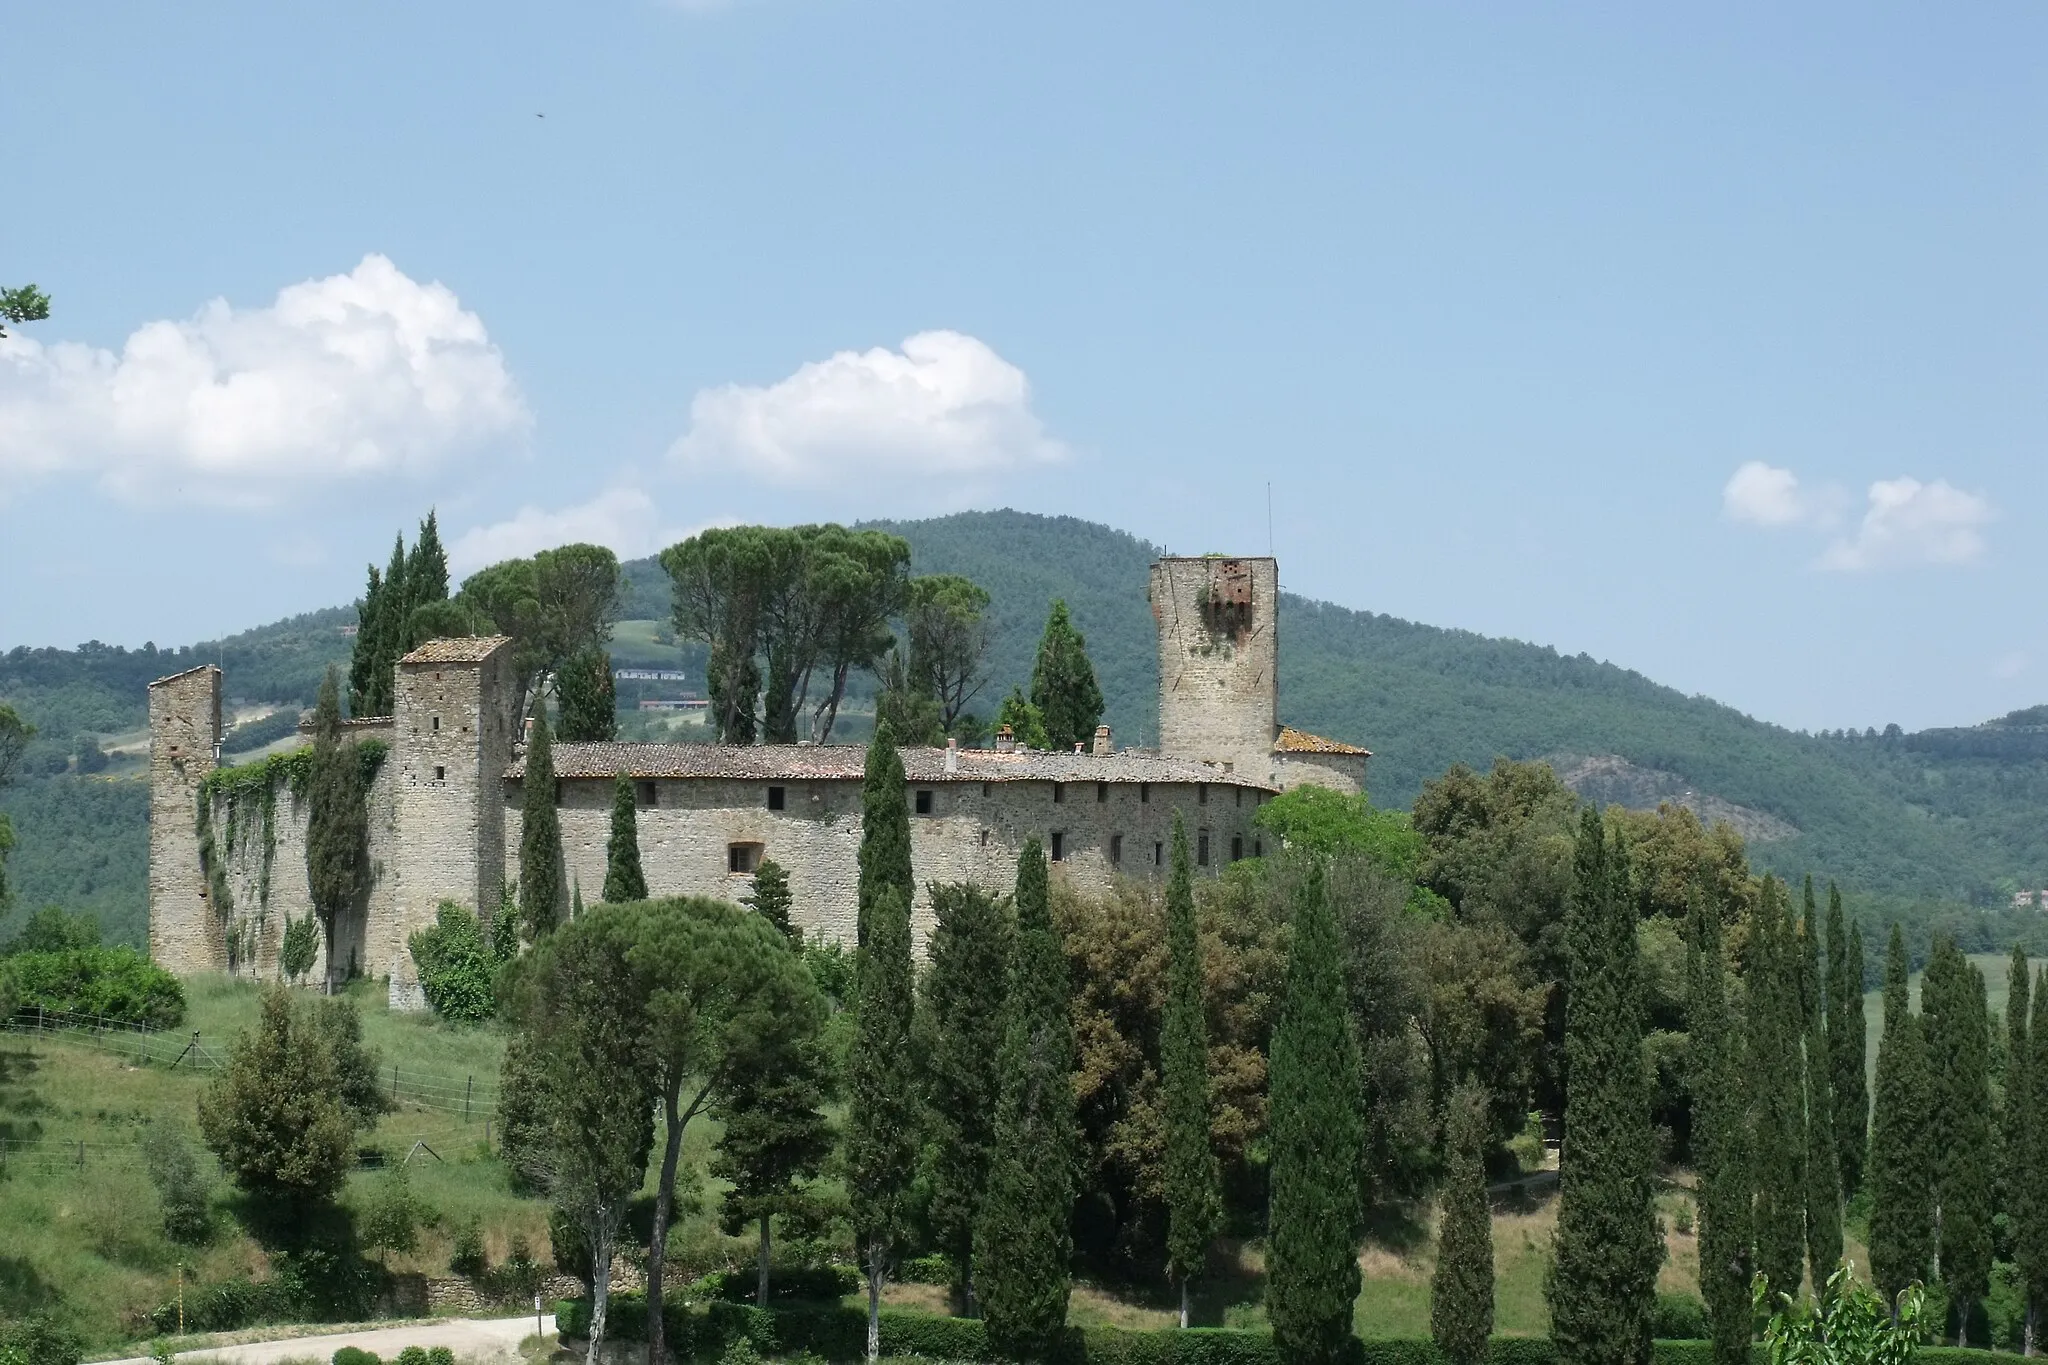 Photo showing: The Castel Reschio in Lisciano Niccone, Province of Perugia, Umbria, Italy